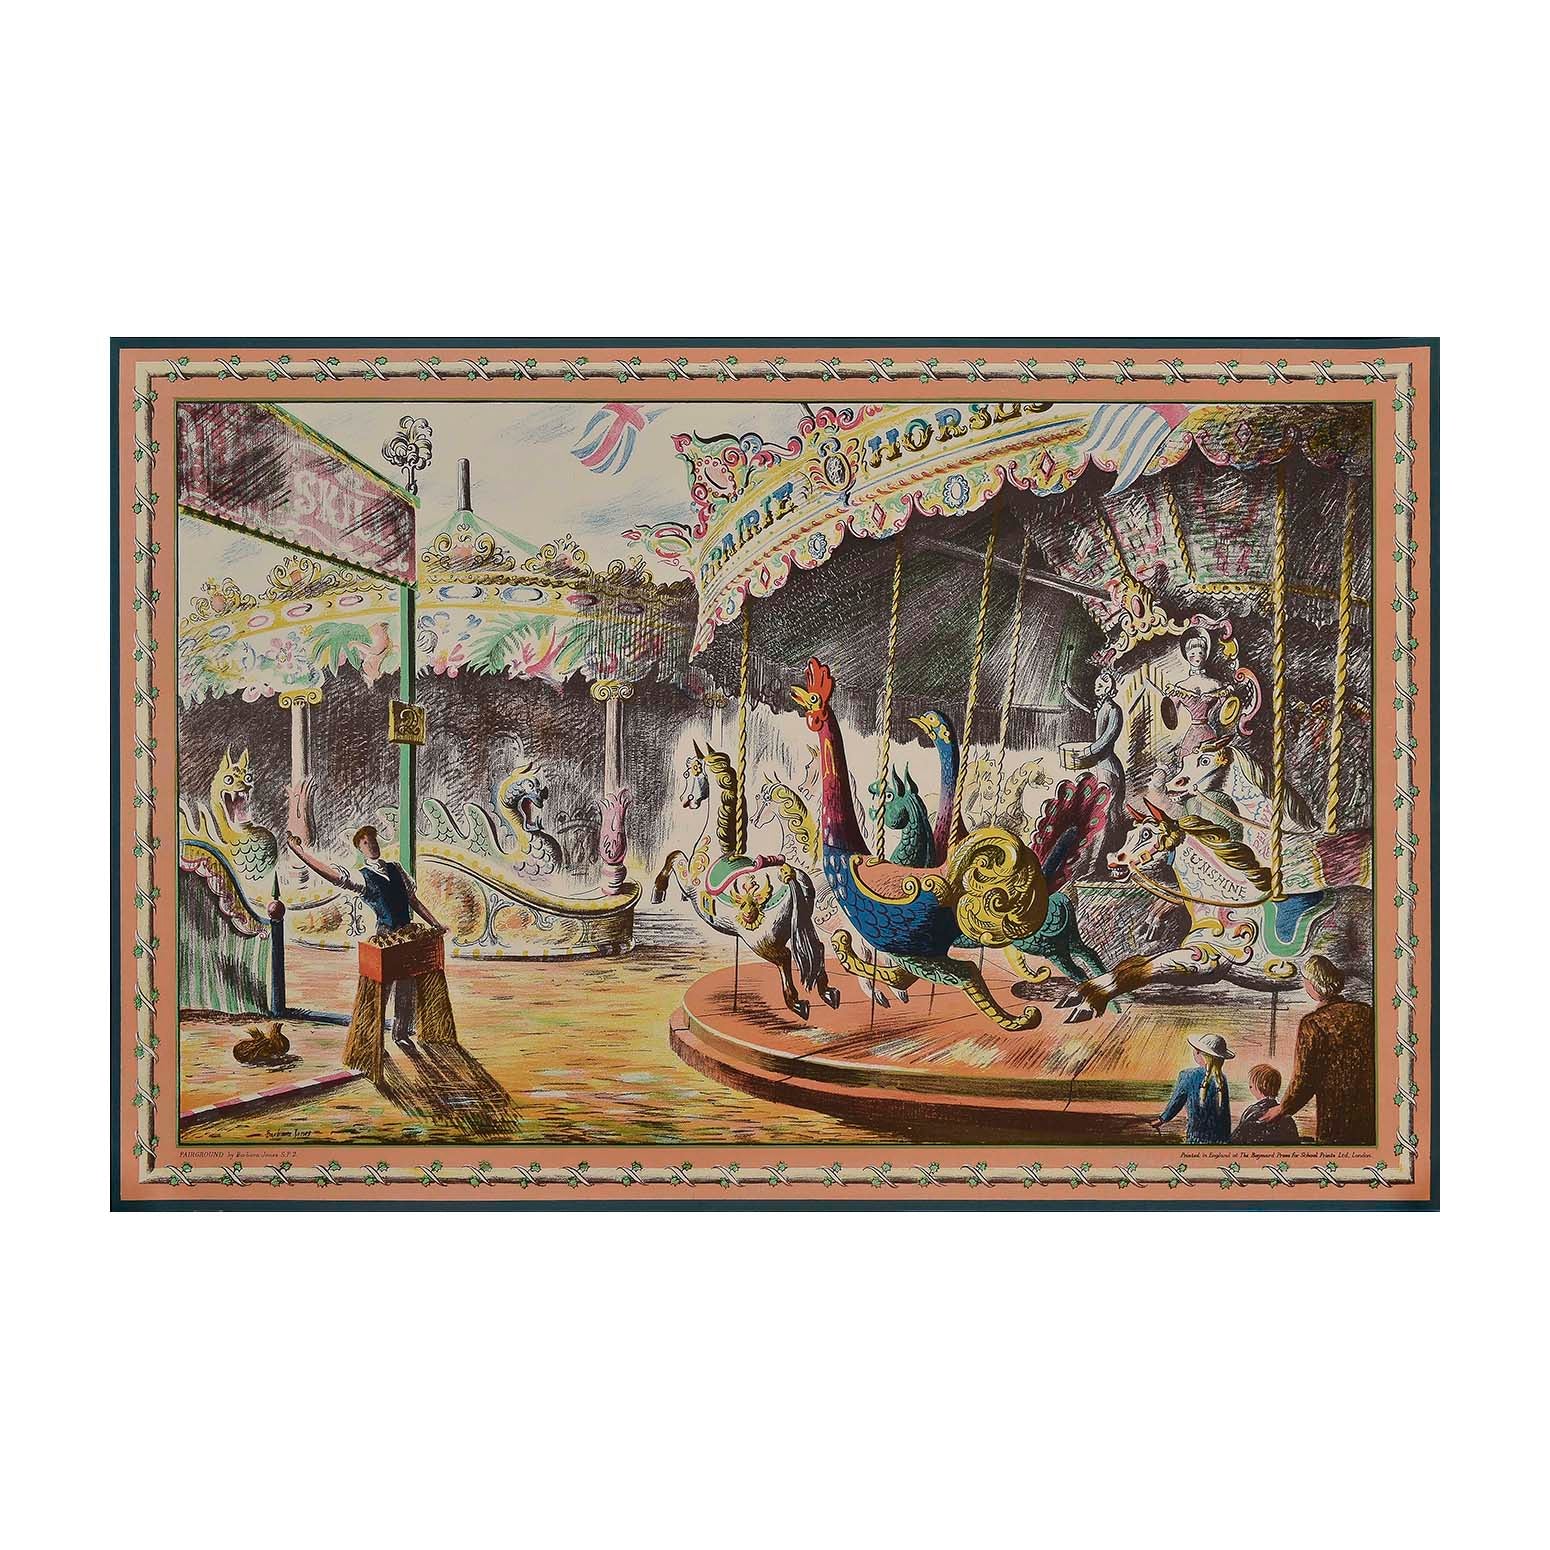 Original ‘School Print’, Fairground, by Barbara Jones, and published by School Prints Ltd, 1946. The design depicts a fairground with a brightly coloured, ornately decorated, merry-go-round in the foreground, featuring cockerels and horses